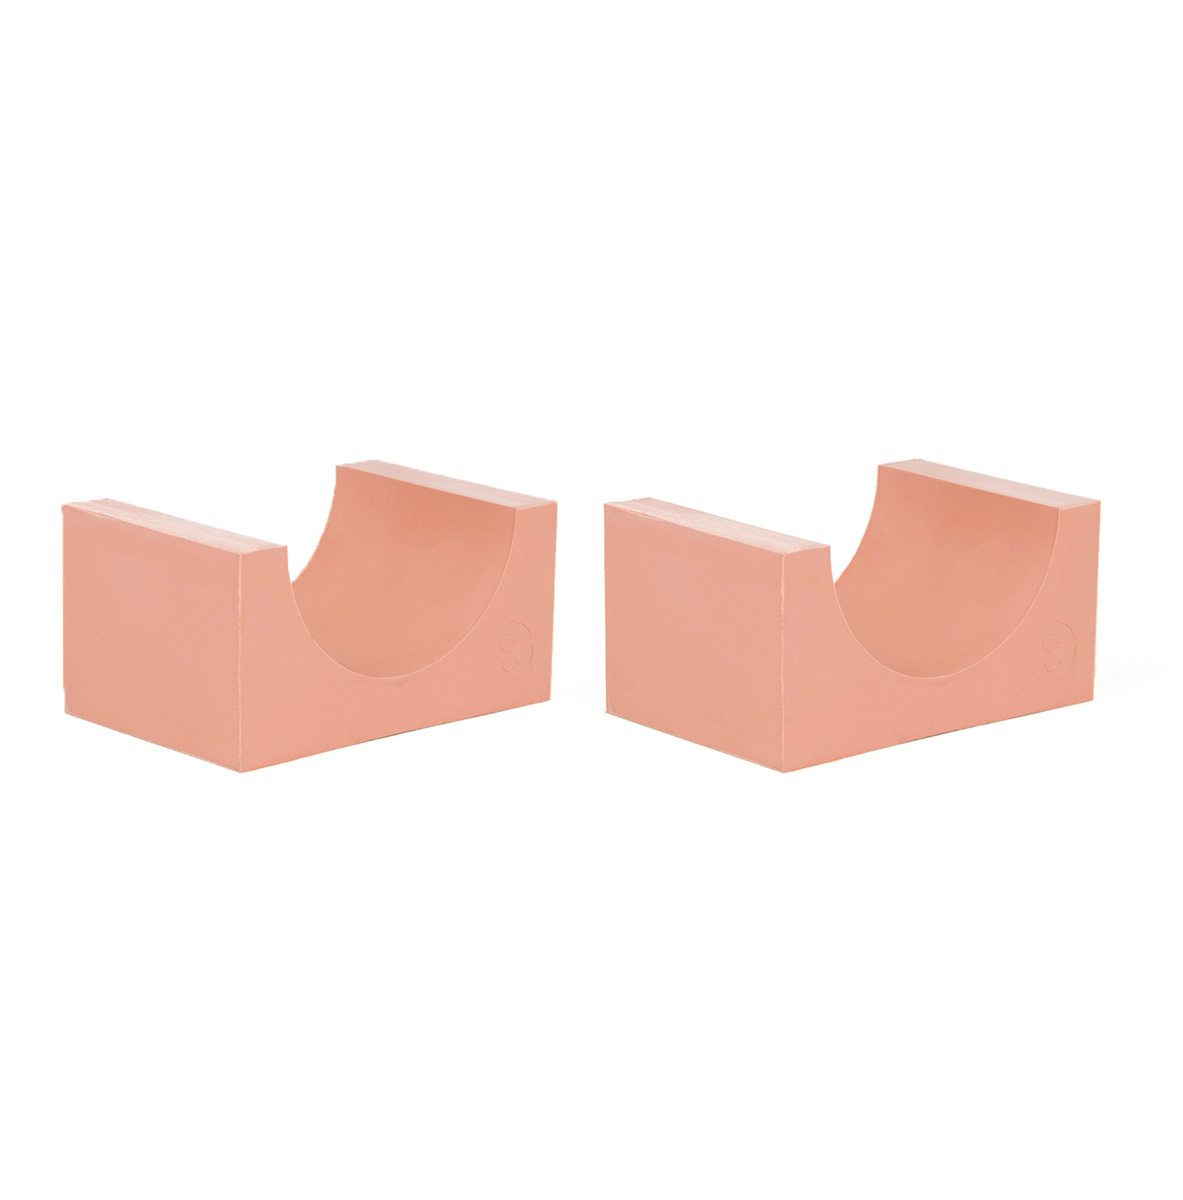 90-66*2 Set of 2 half insert block lycron, 90-66 for cable/pipe diam. 65.5-67.5mm